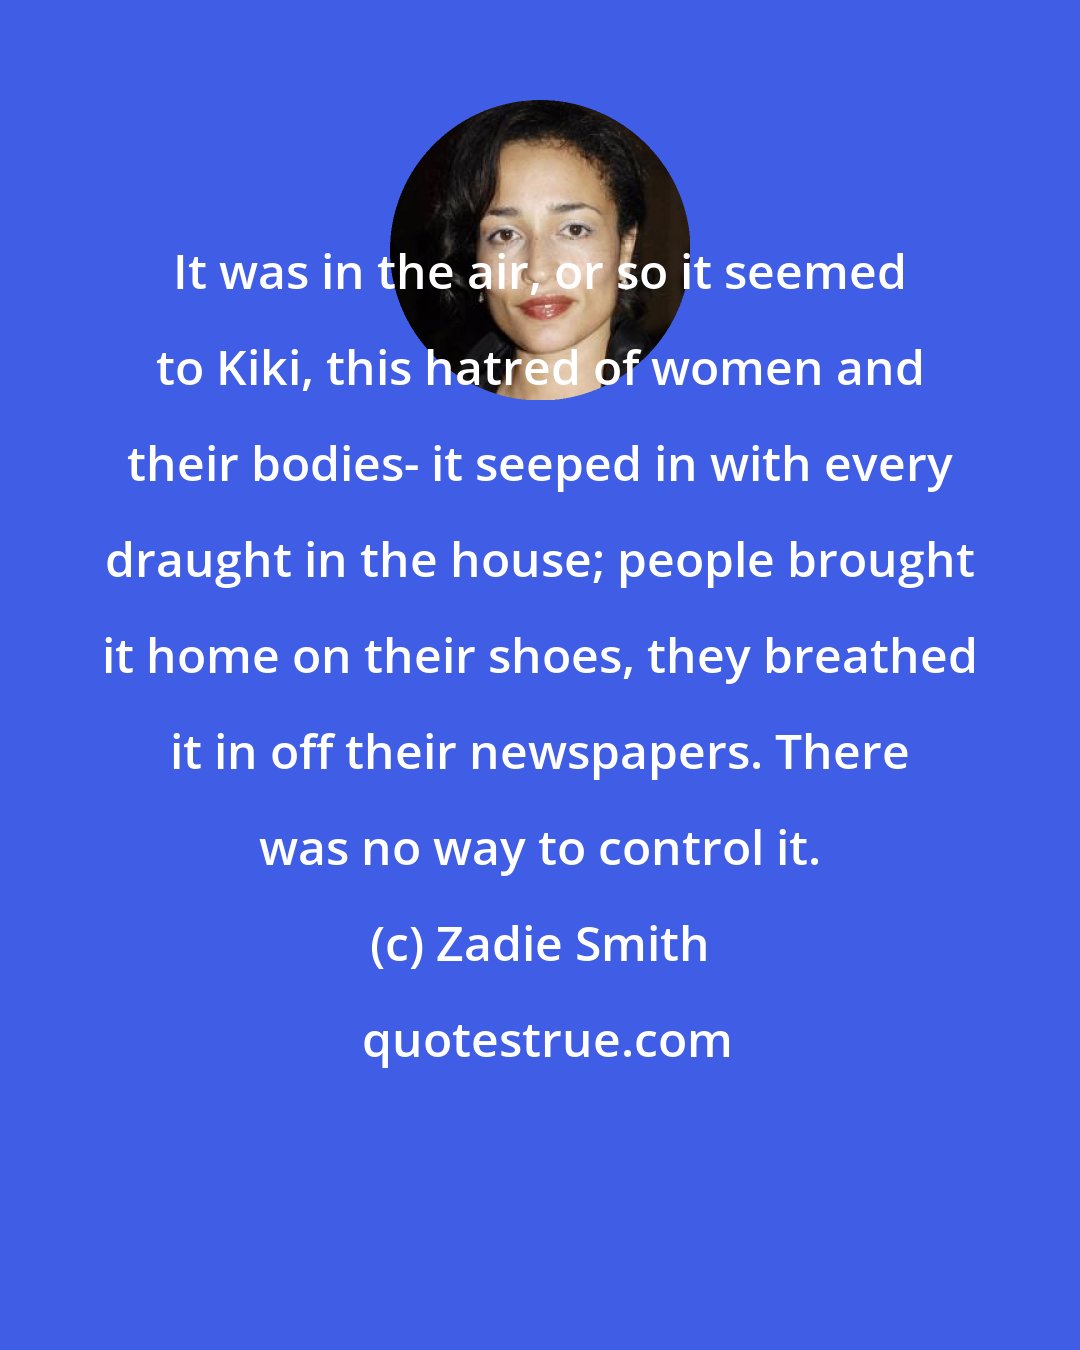 Zadie Smith: It was in the air, or so it seemed to Kiki, this hatred of women and their bodies- it seeped in with every draught in the house; people brought it home on their shoes, they breathed it in off their newspapers. There was no way to control it.